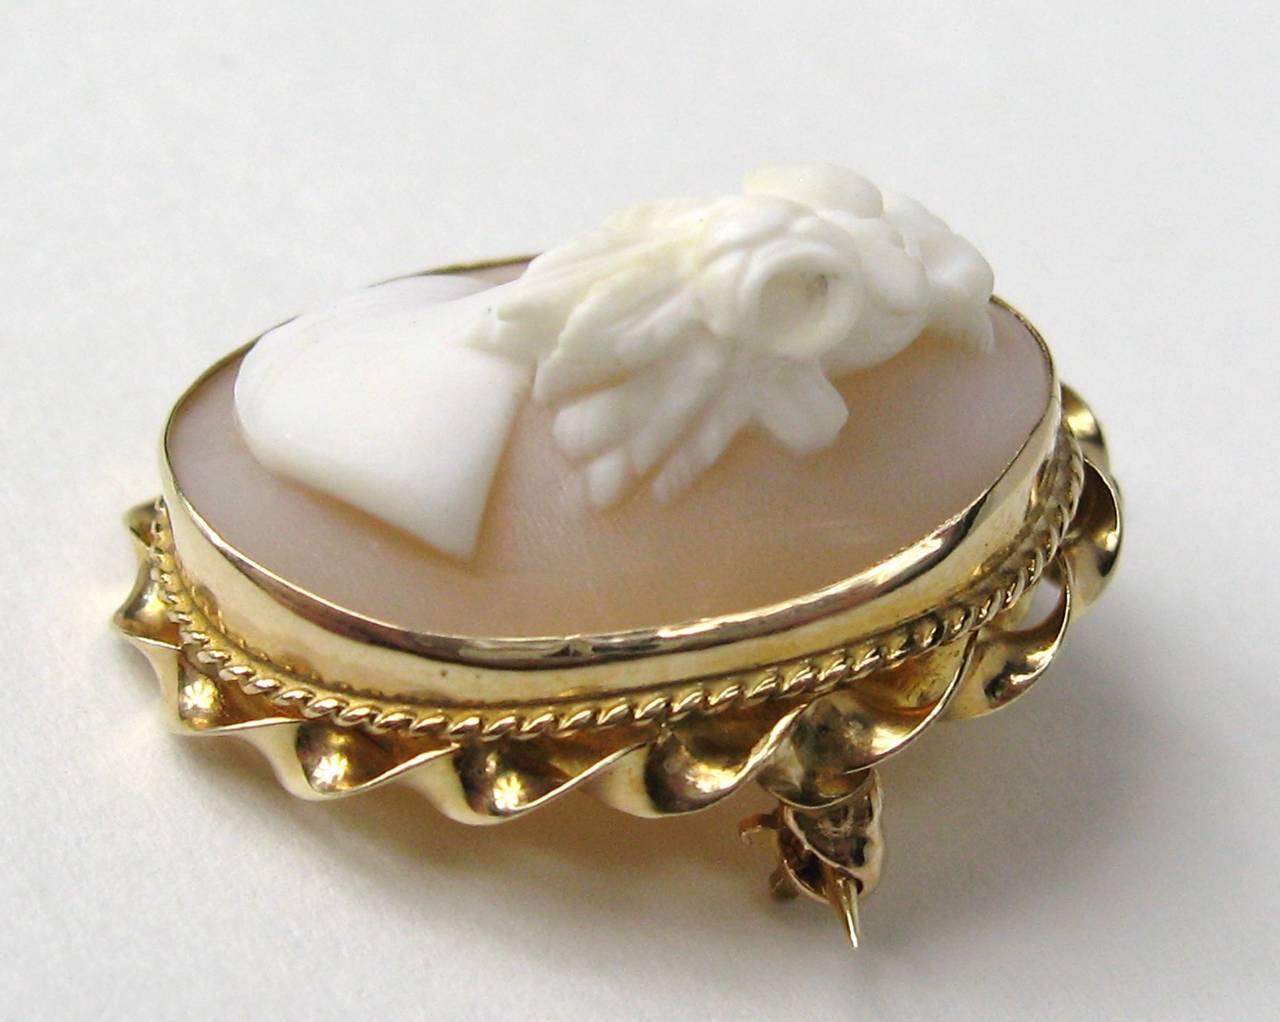 Highly Detailed Gold Cameo Shell Pendant Brooch 1